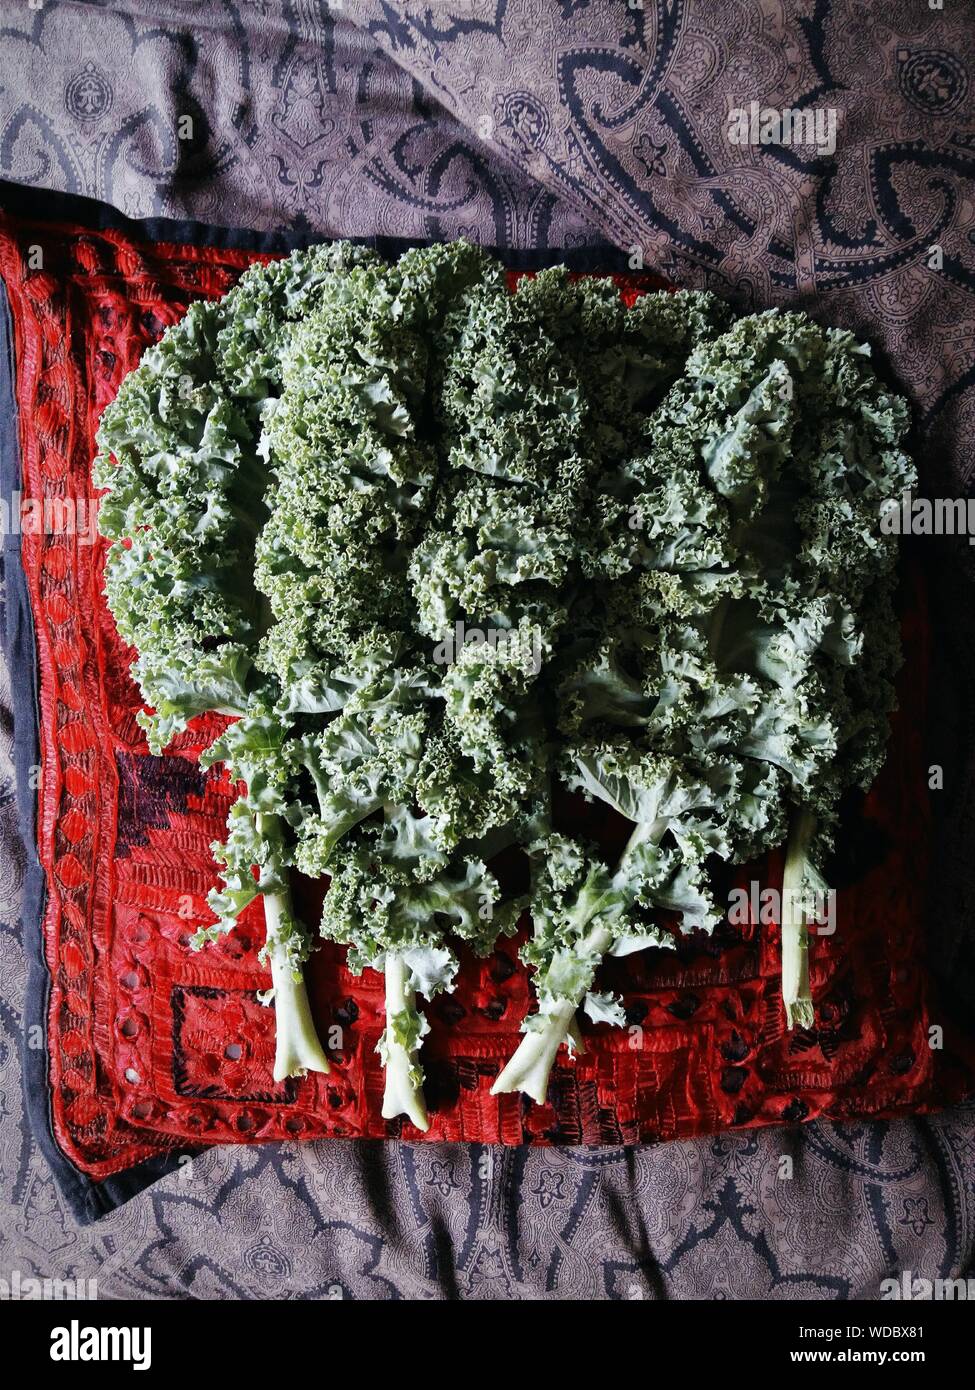 Overhead View Of Kale Leaves On Cushion Stock Photo